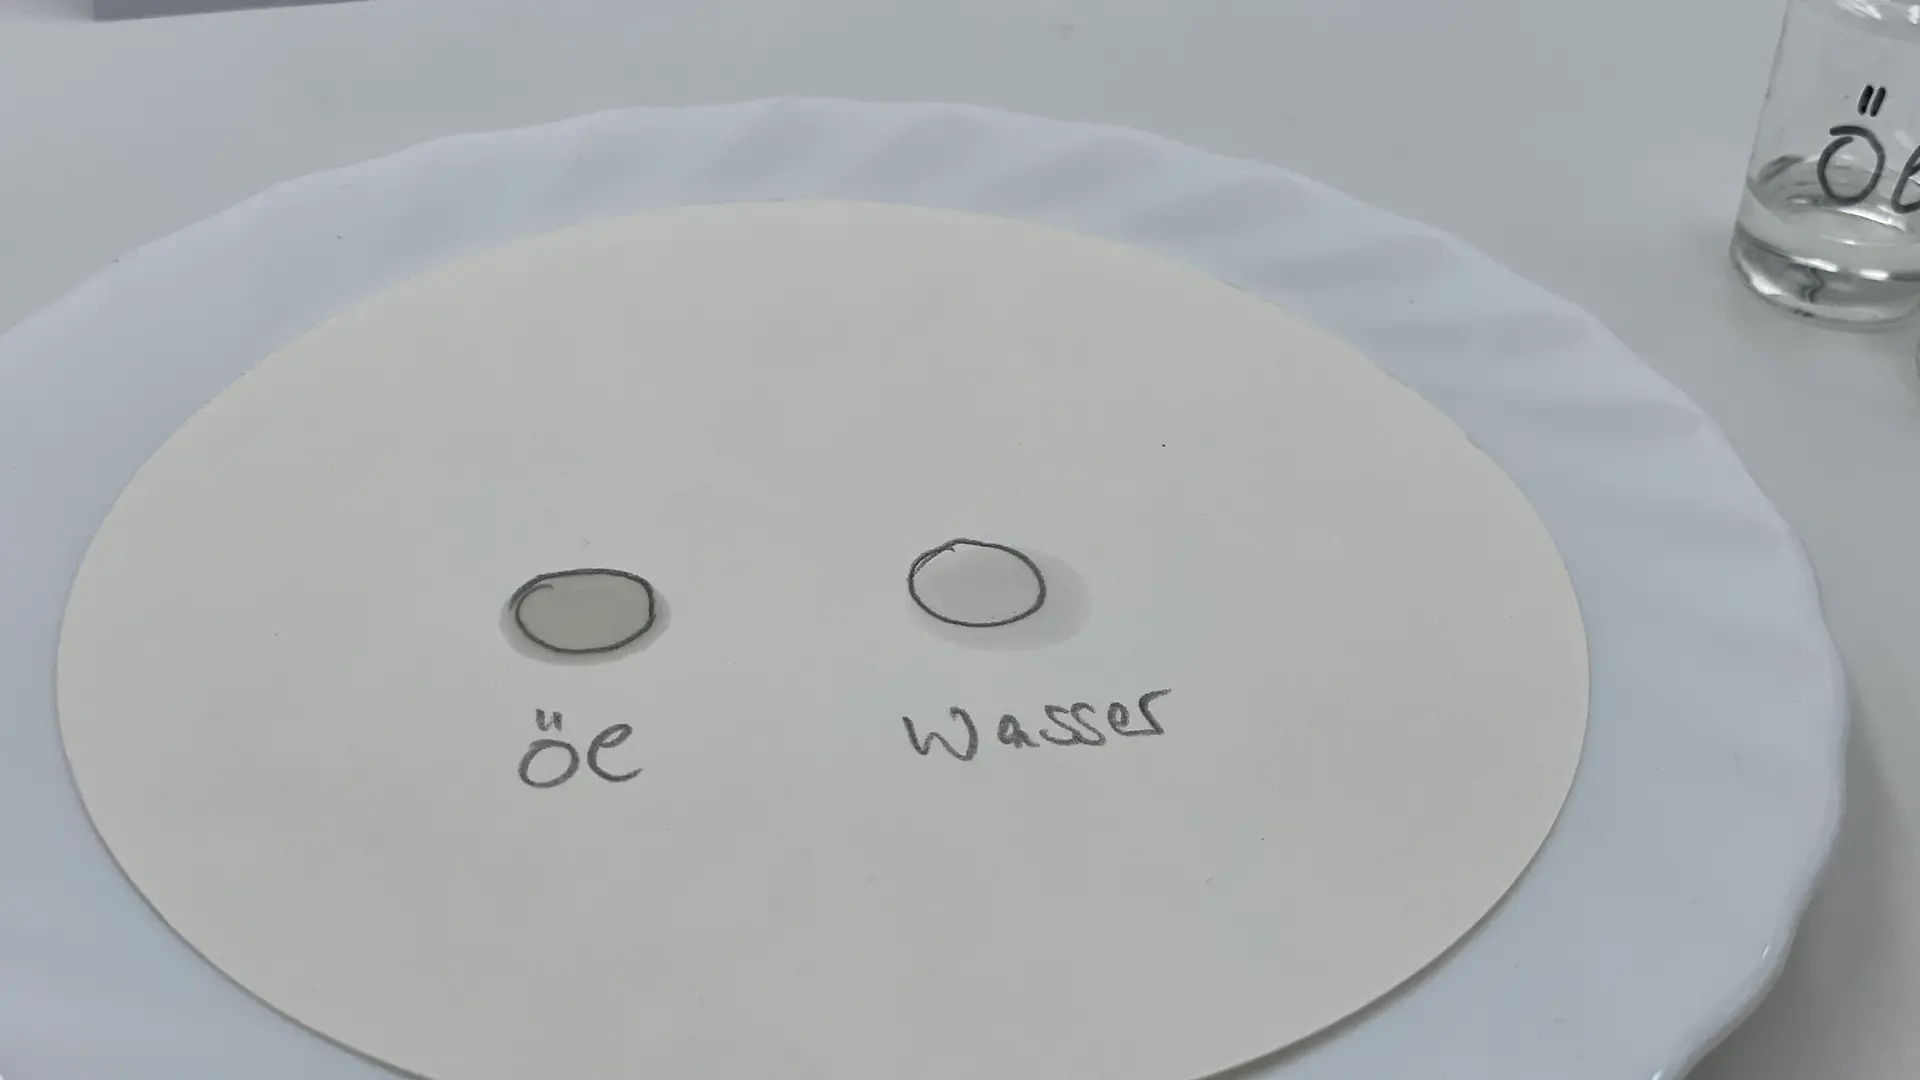 Filter paper with water and oil stains in two circles and the labels "water" and "oil”.